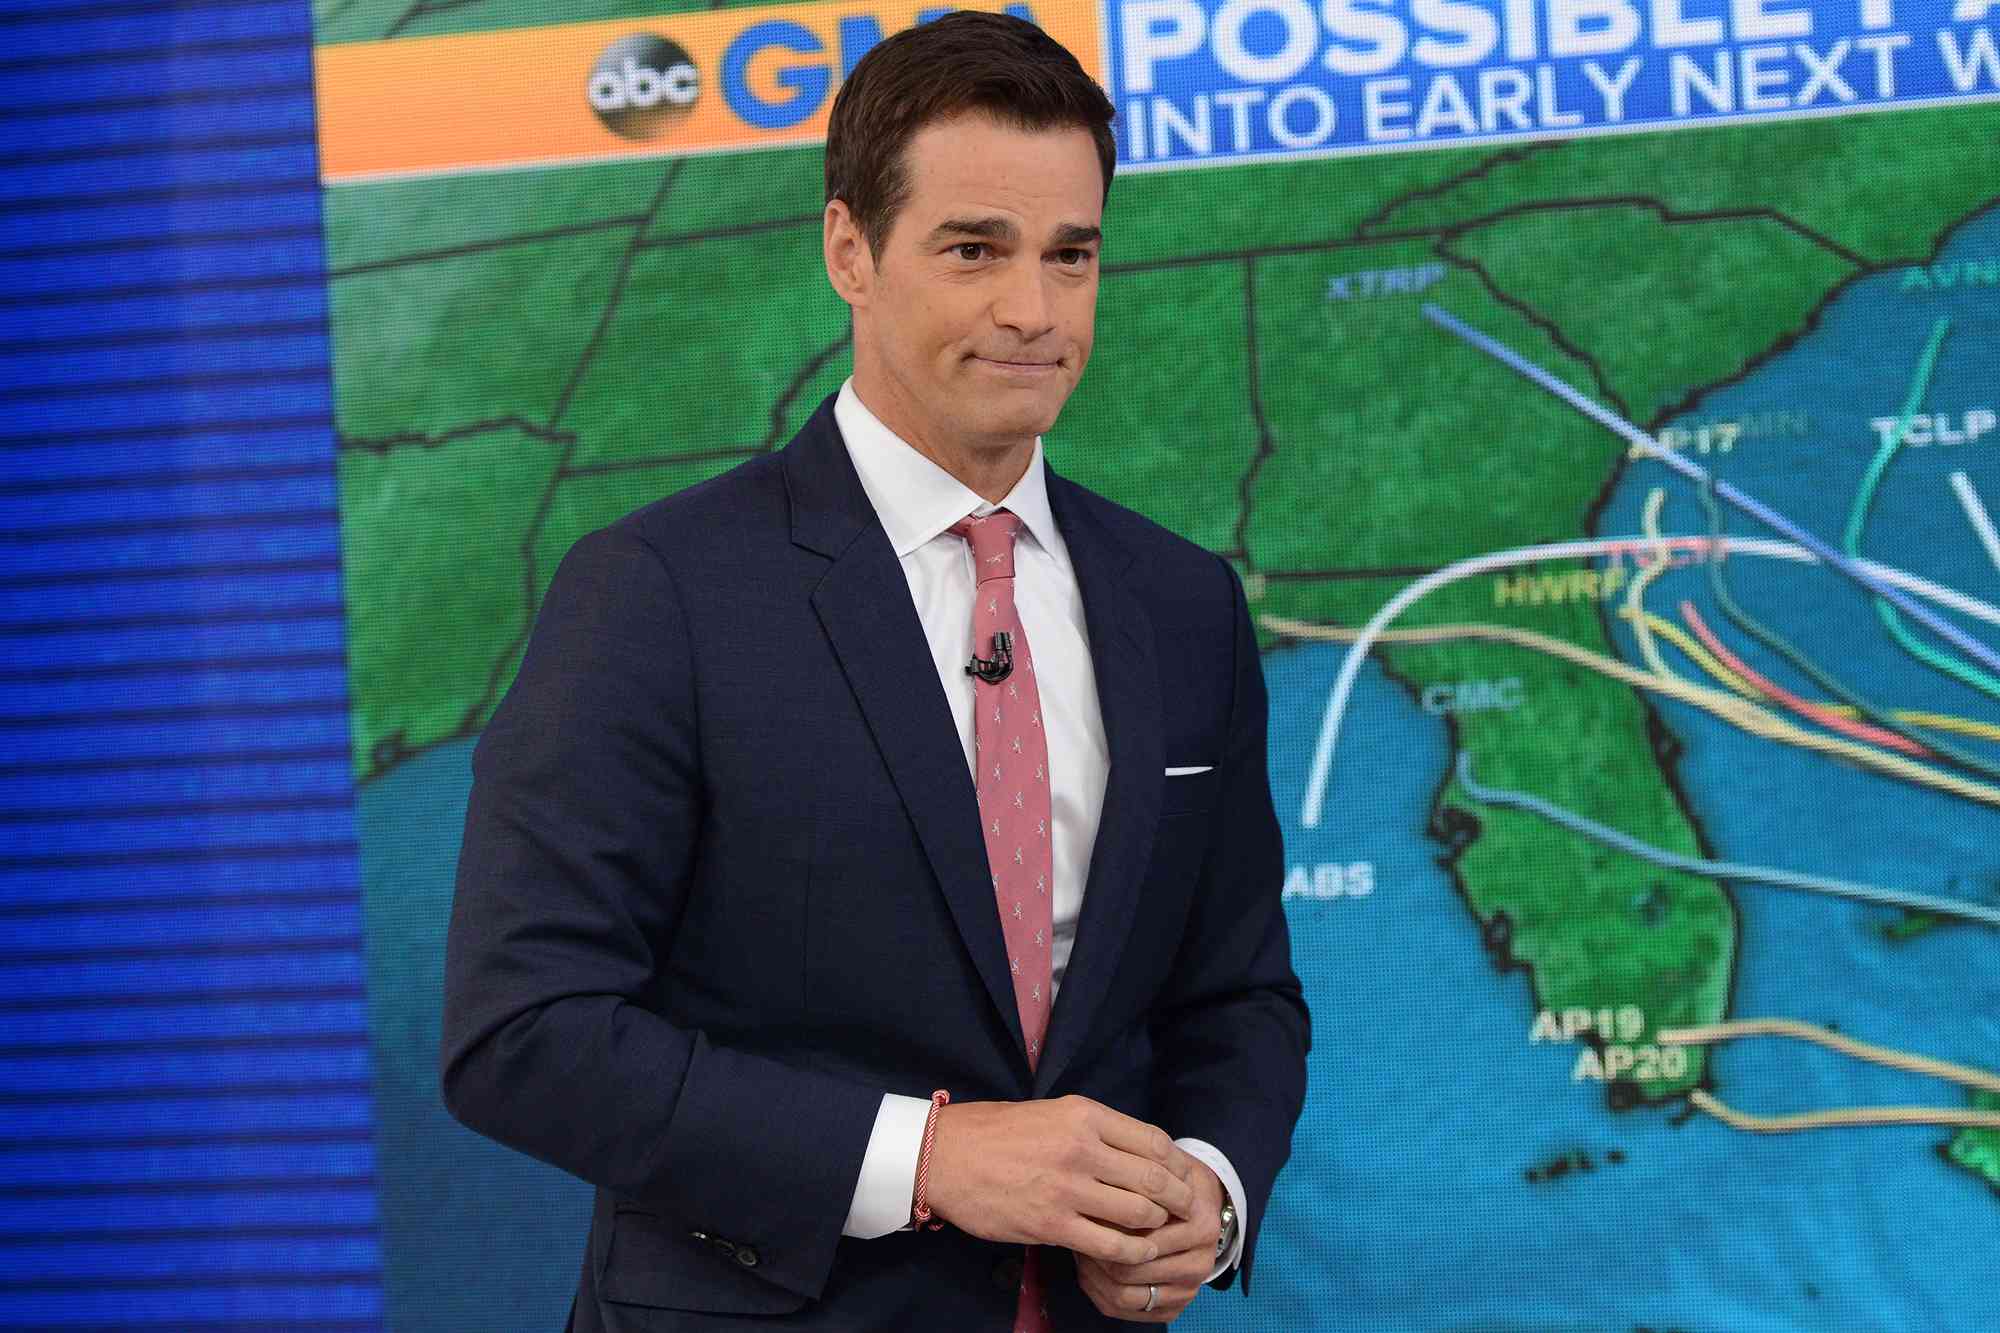 Rob Marciano Found ABC Exit 'Unexpected' as Colleagues Defend His 'Professional' and 'Positive' Behavior: Sources